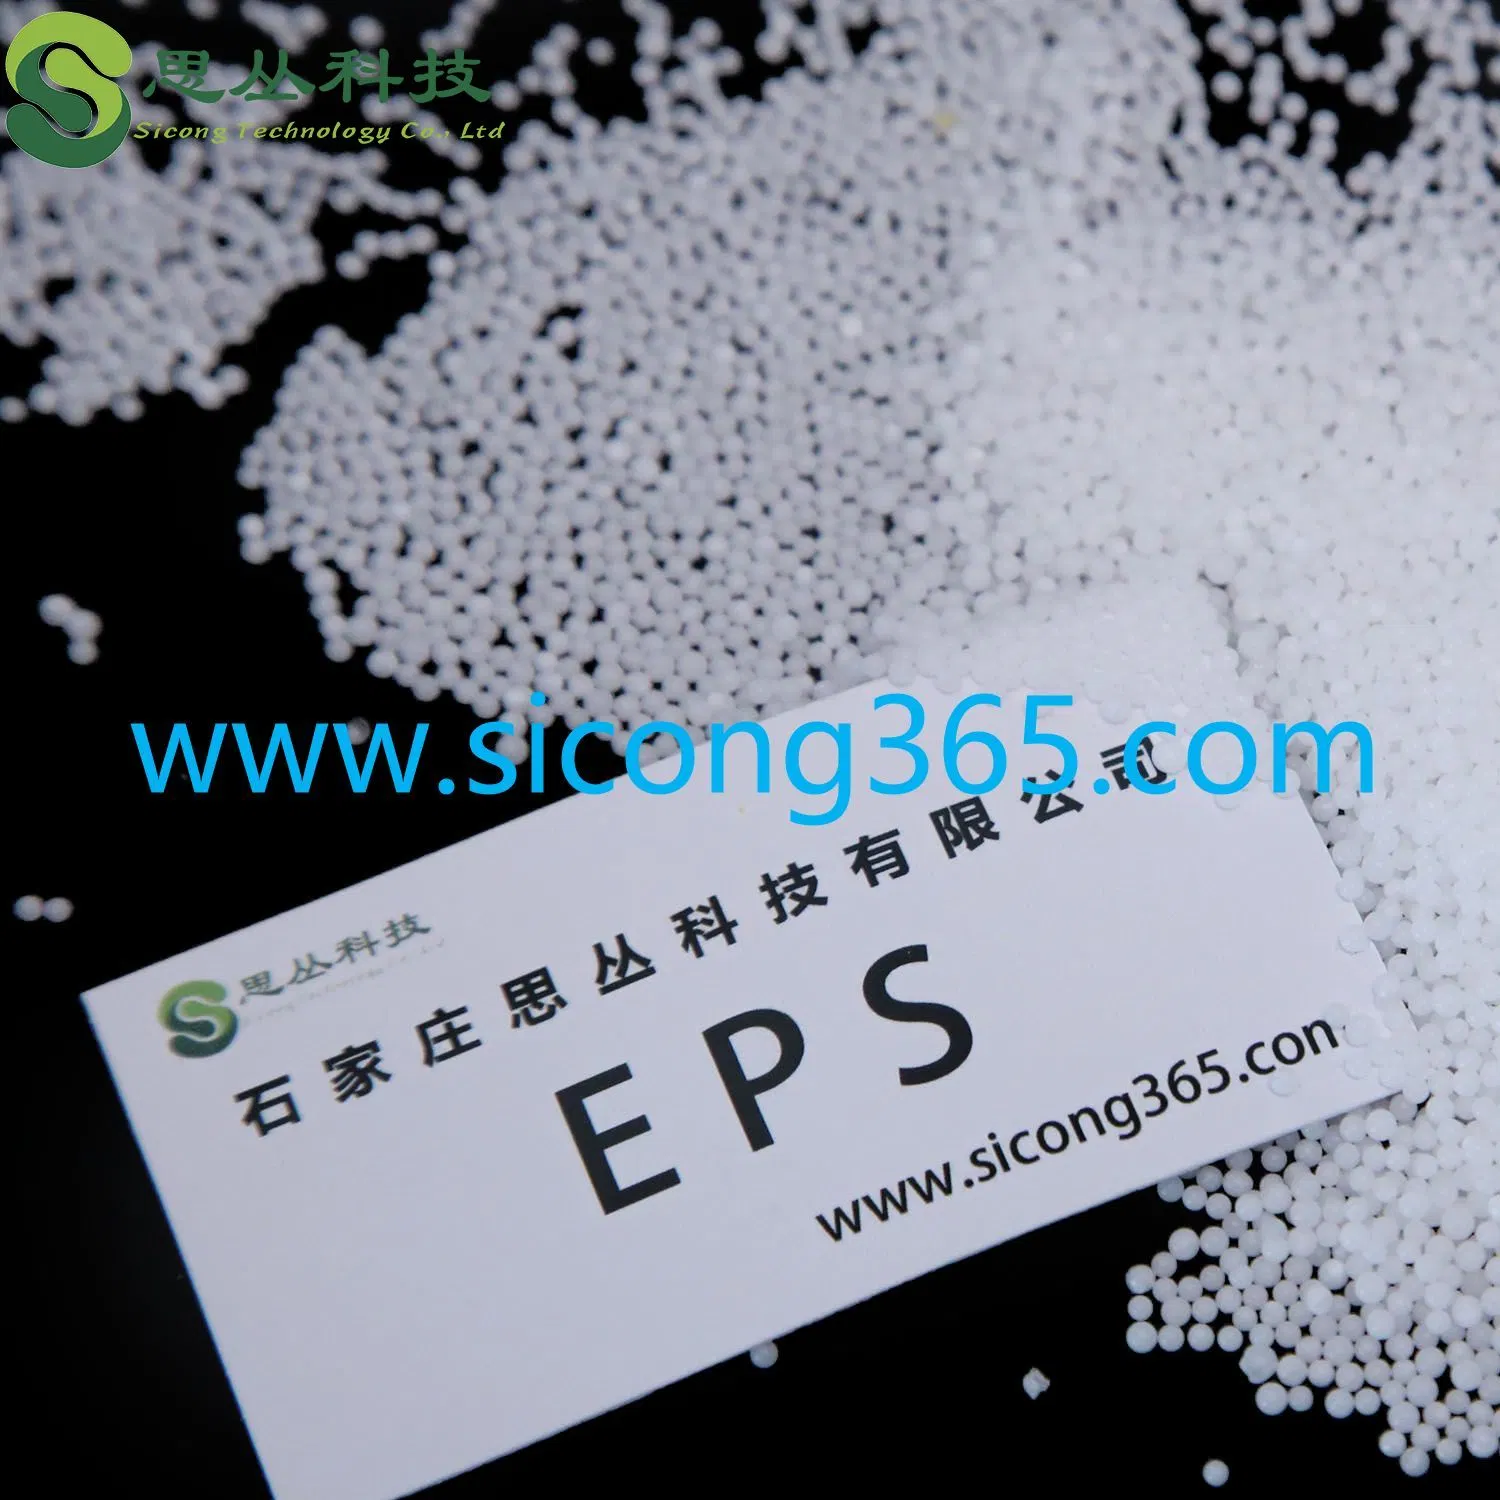 Top Quality Virgin Resin Pellets Granules Expanded Polystyrene EPS Raw Material EPS Beads